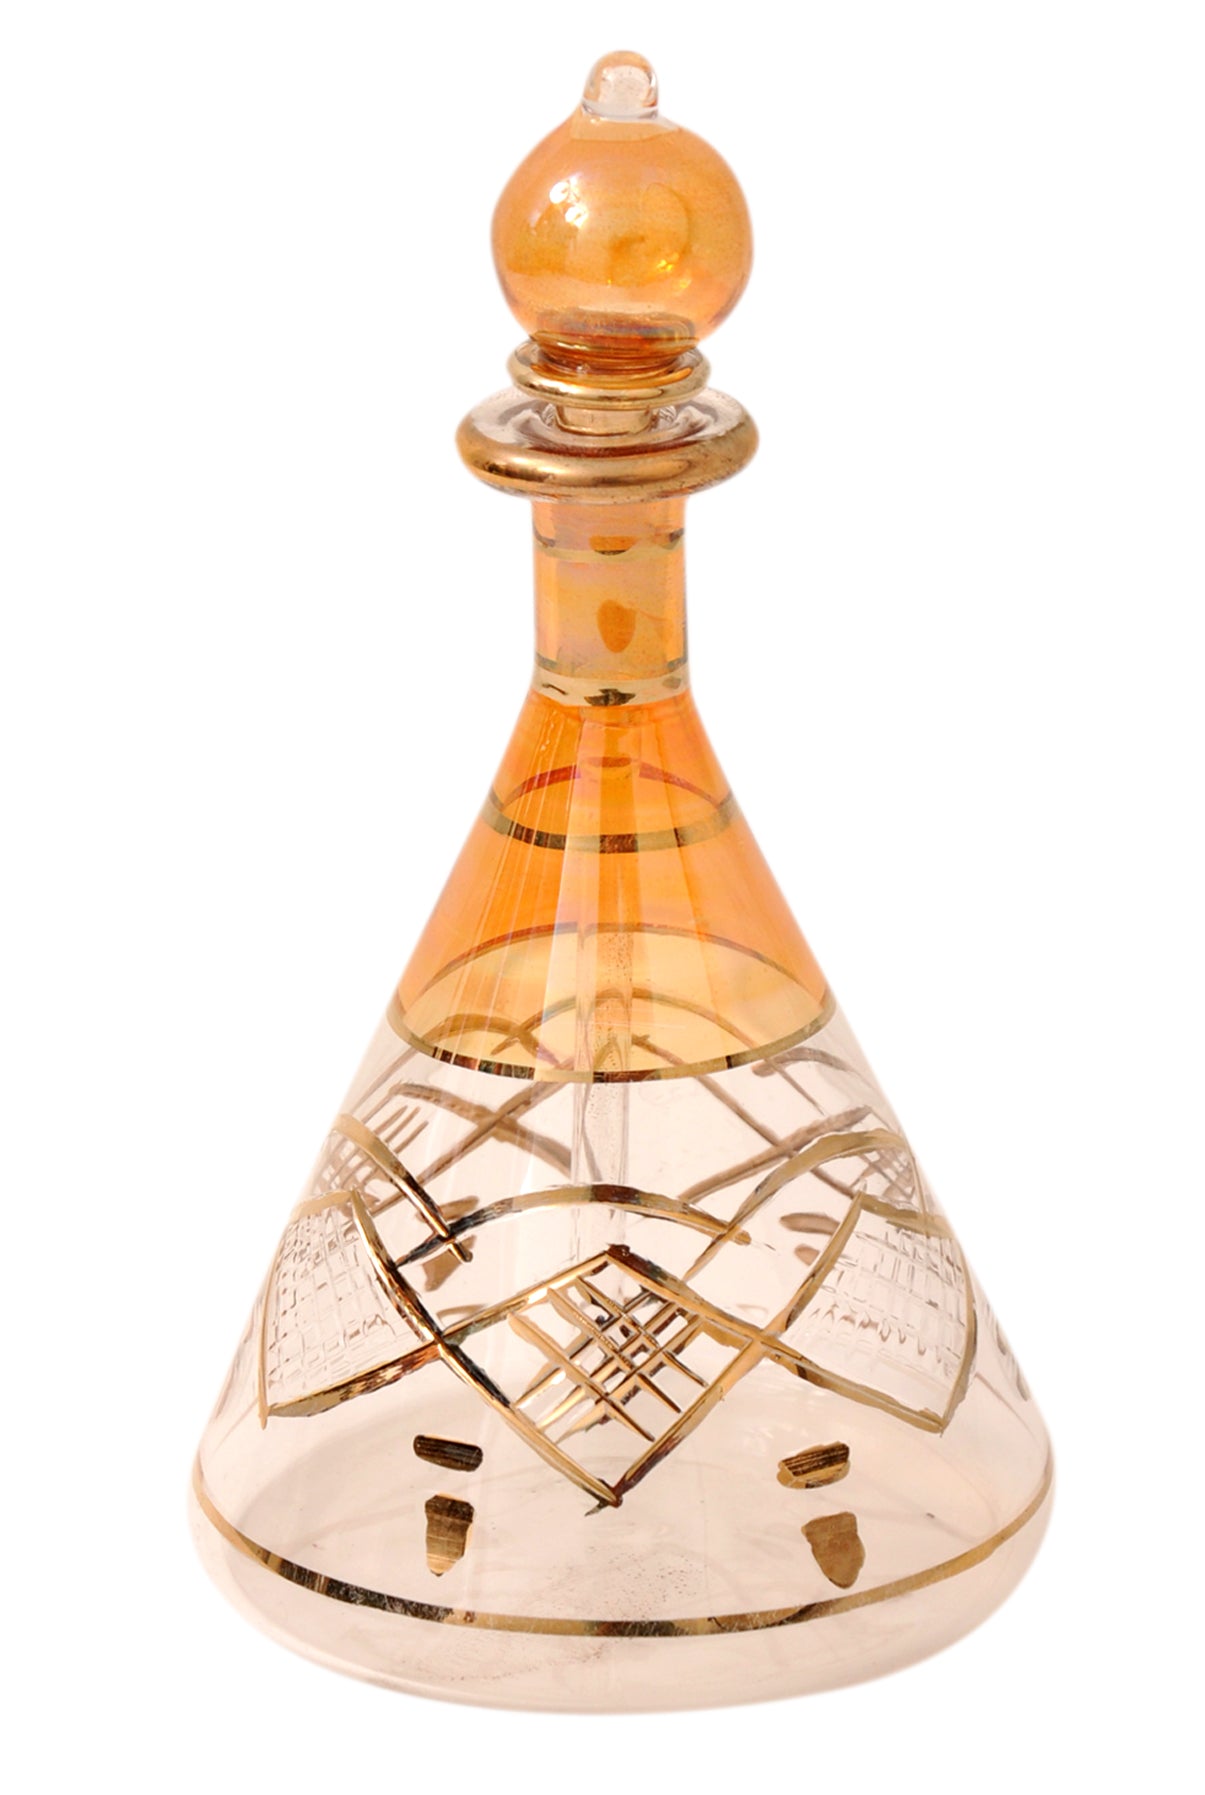 Egyptian perfume bottles single large hand Blown Decorative Pyrex Glass Vial Height inch 7.75 inch ( 20 cm ) by CraftsOfEgypt